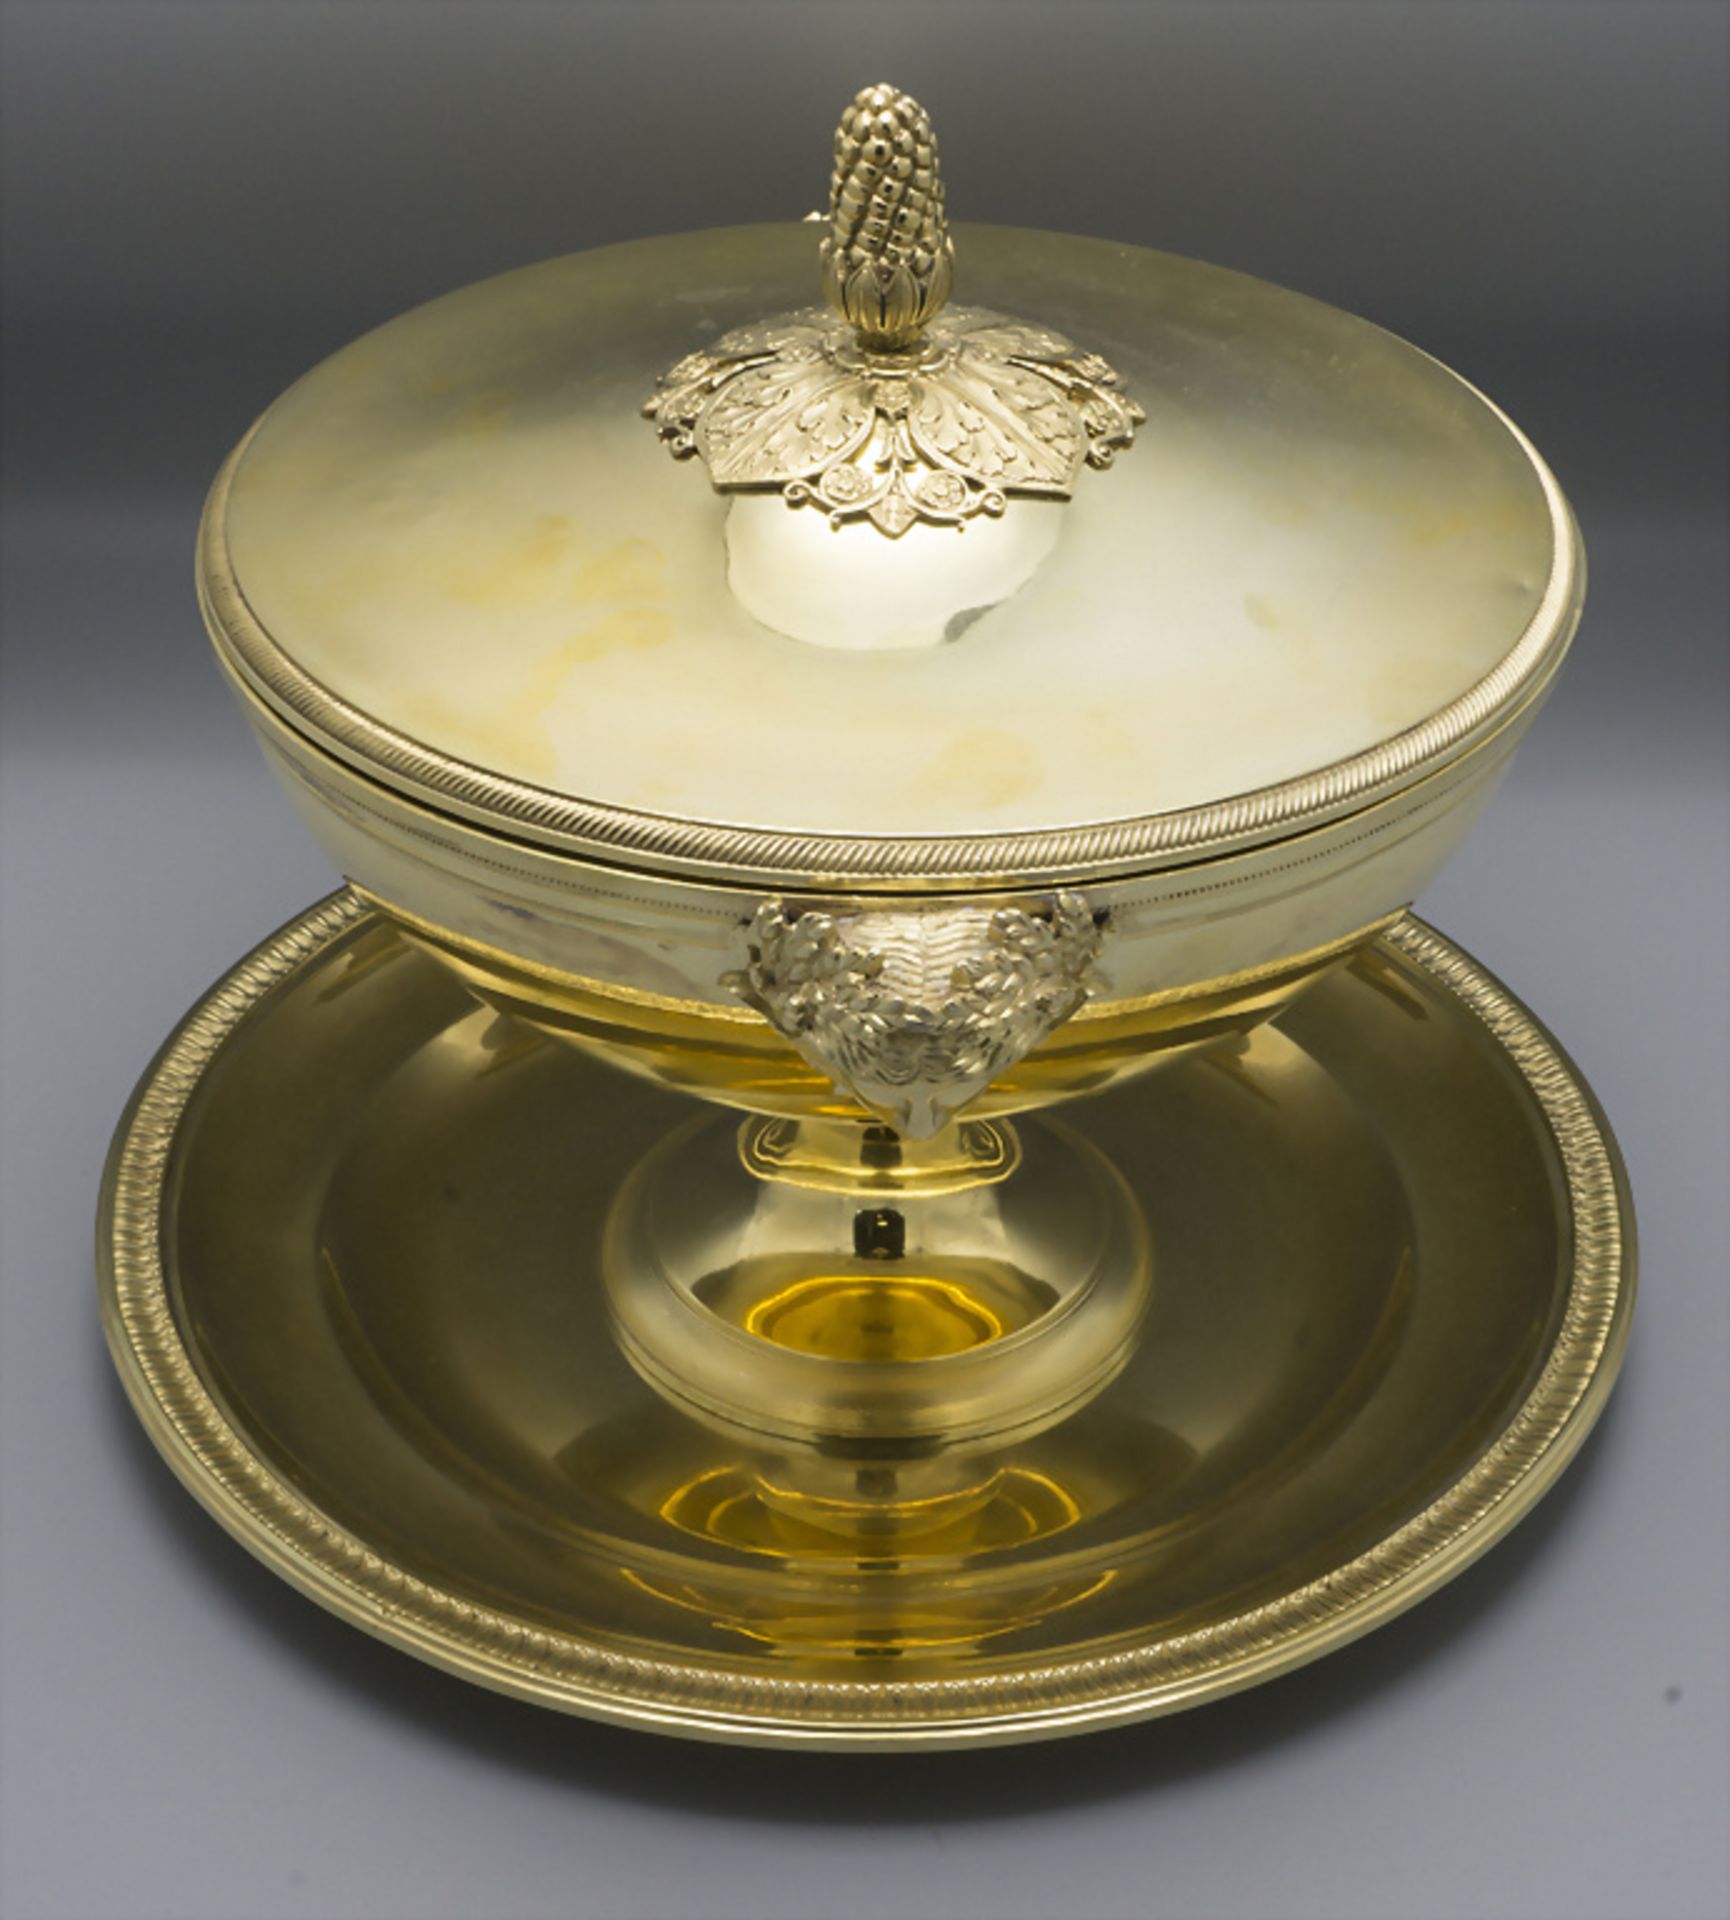 Deckelterrine auf Presentoire / A tureen with cover and plate, Emile Puiforcat, Paris, nach 1857 - Image 4 of 10